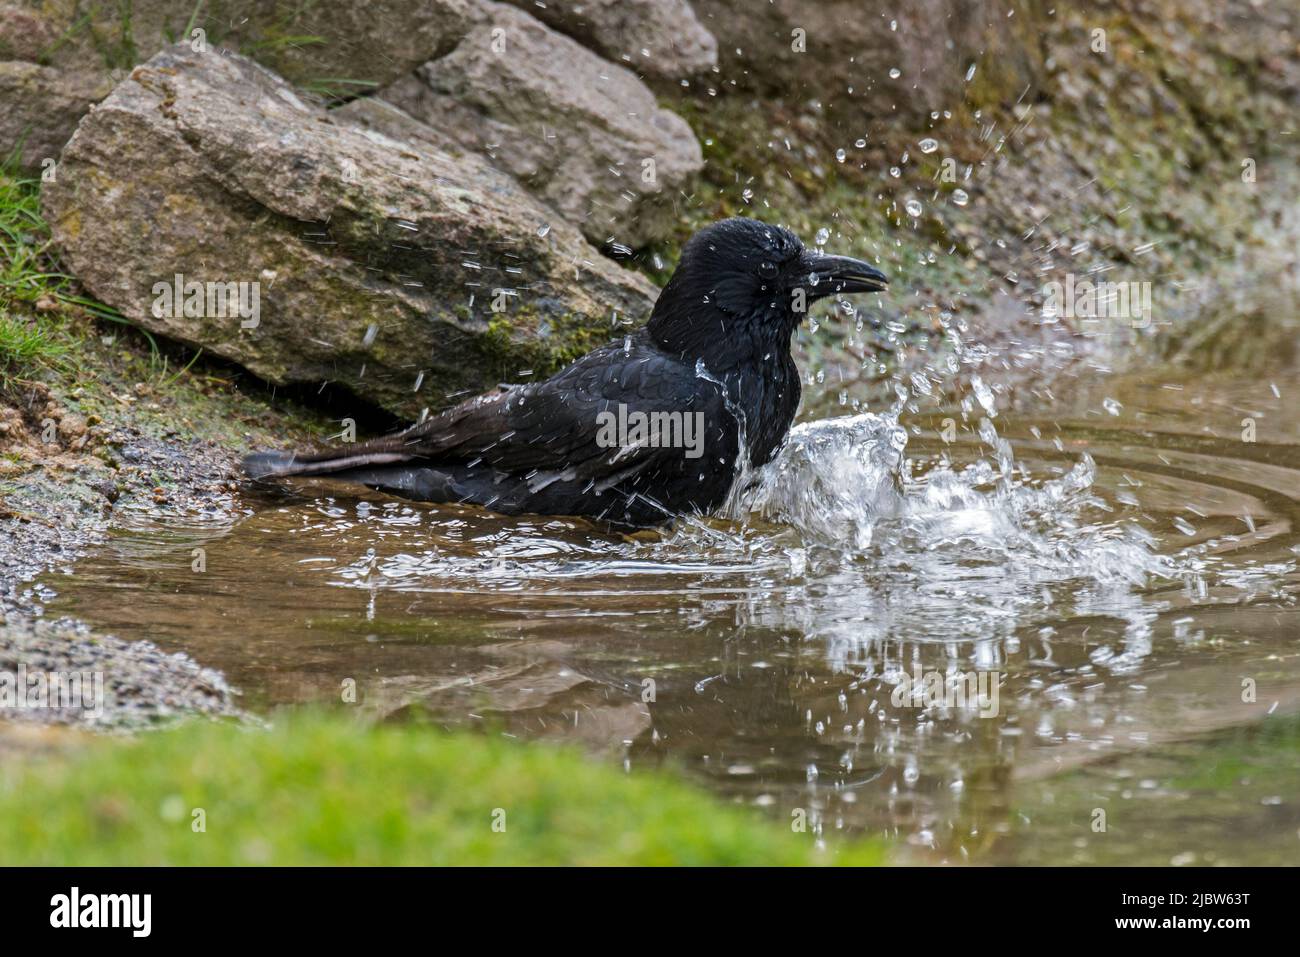 Carrion crow (Corvus corone) bathing and splashing in water of pond Stock Photo